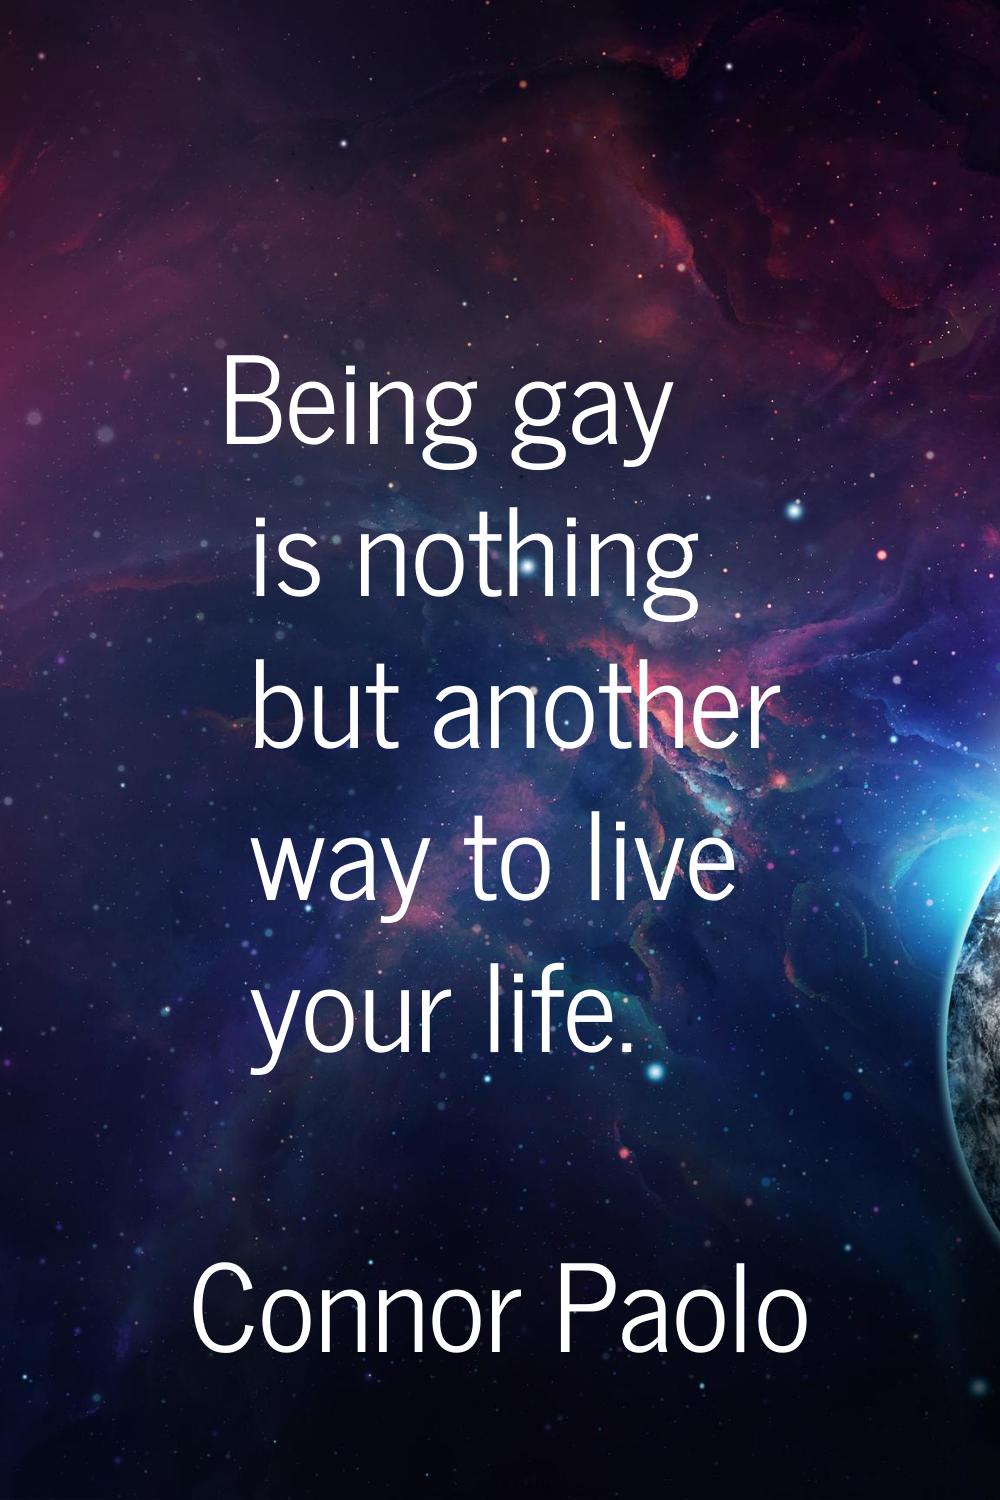 Being gay is nothing but another way to live your life.